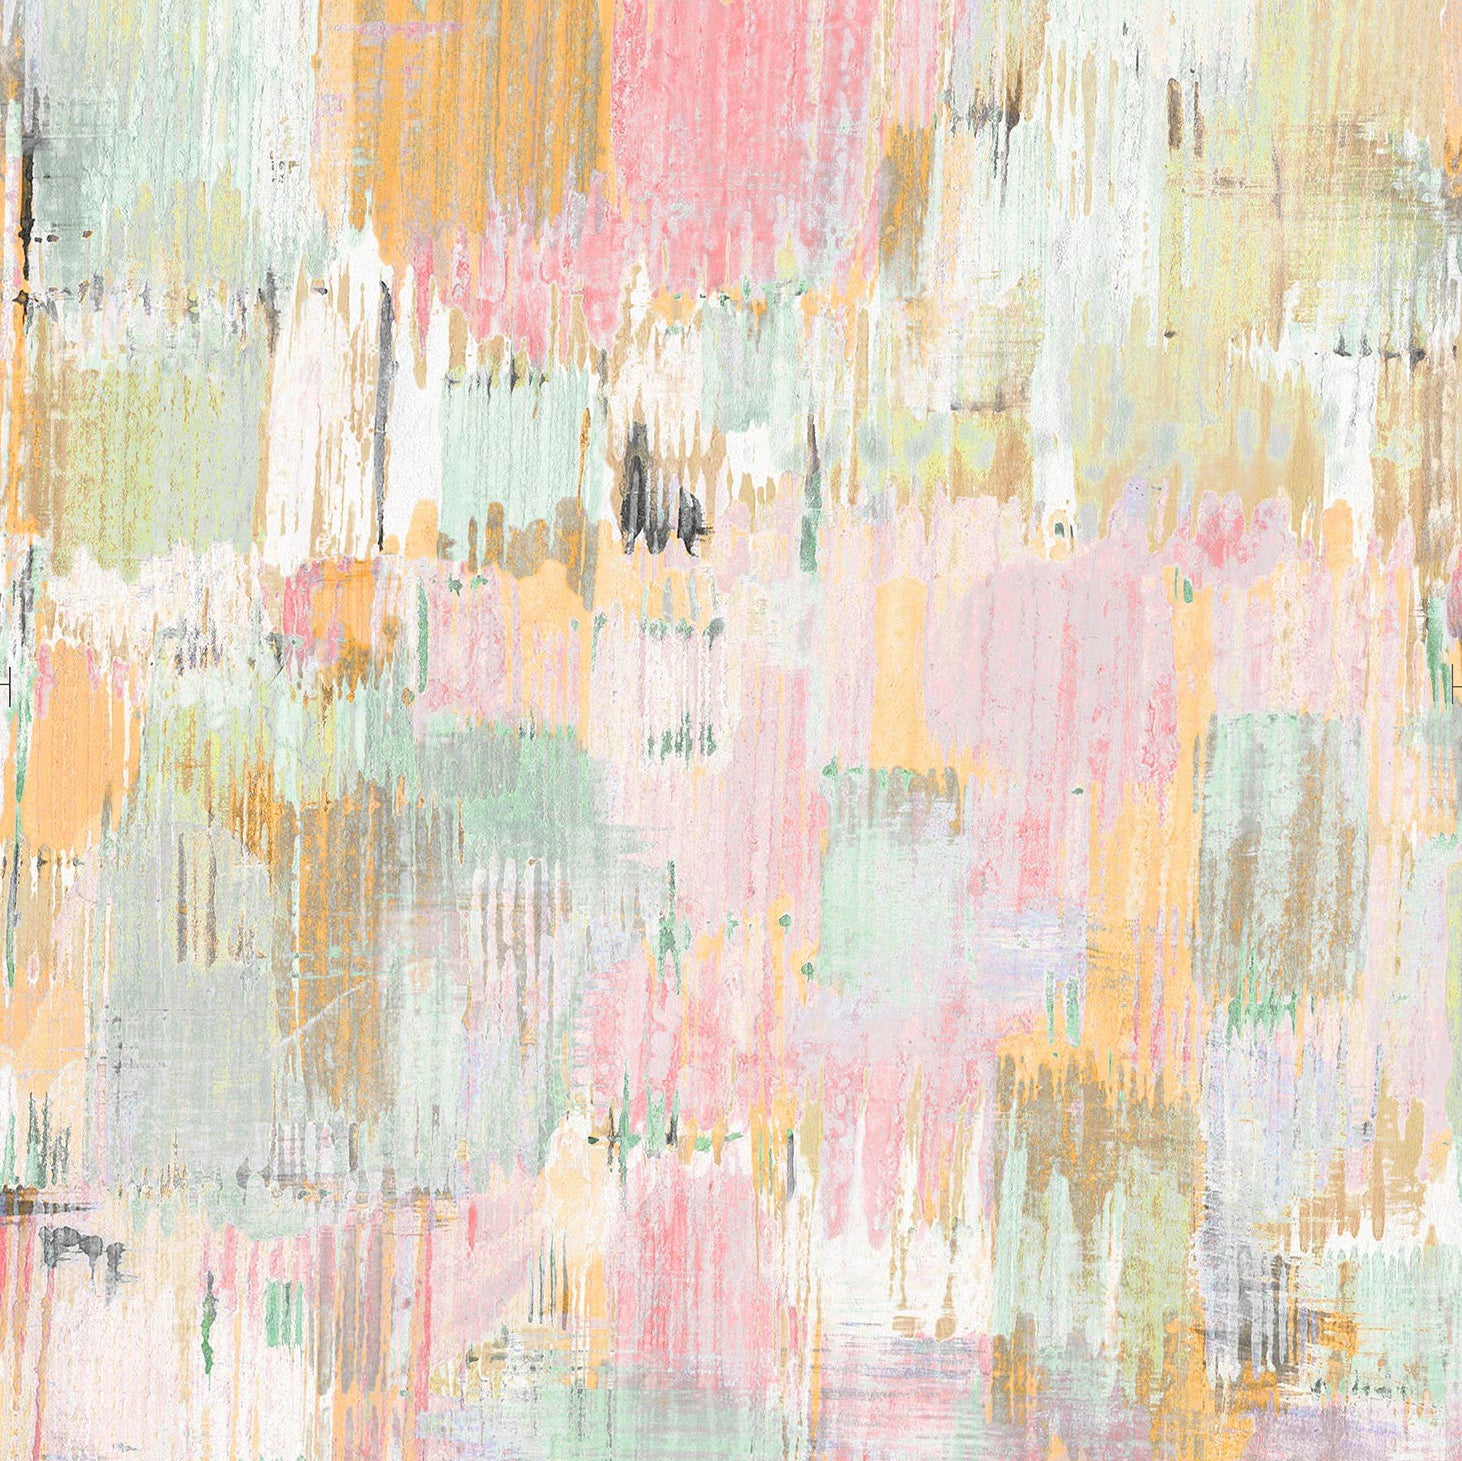 Detail of wallpaper in an abstract textural print in shades of pink, green, yellow and white.